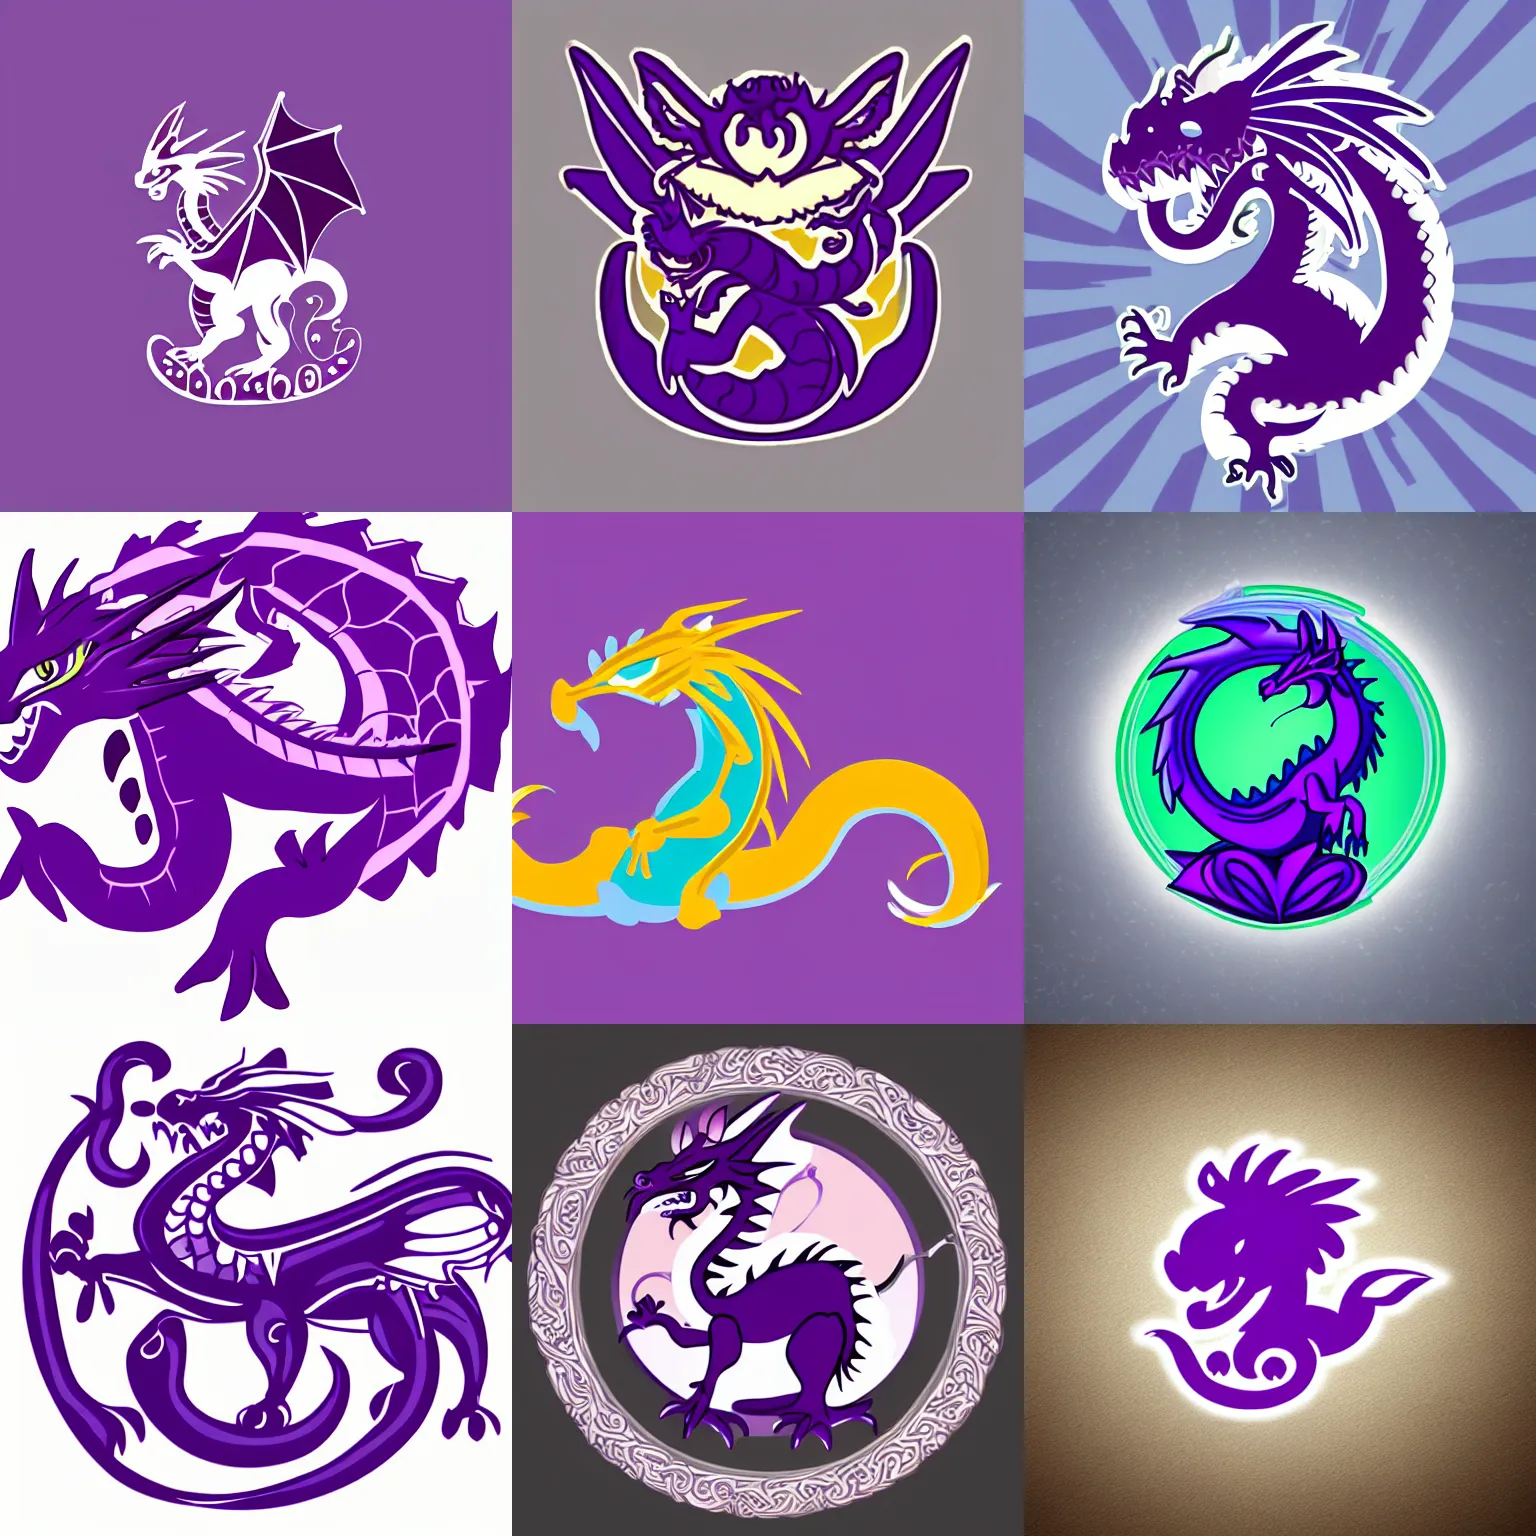 Prompt: a logo with very cute well-designed purple dragon, digital art